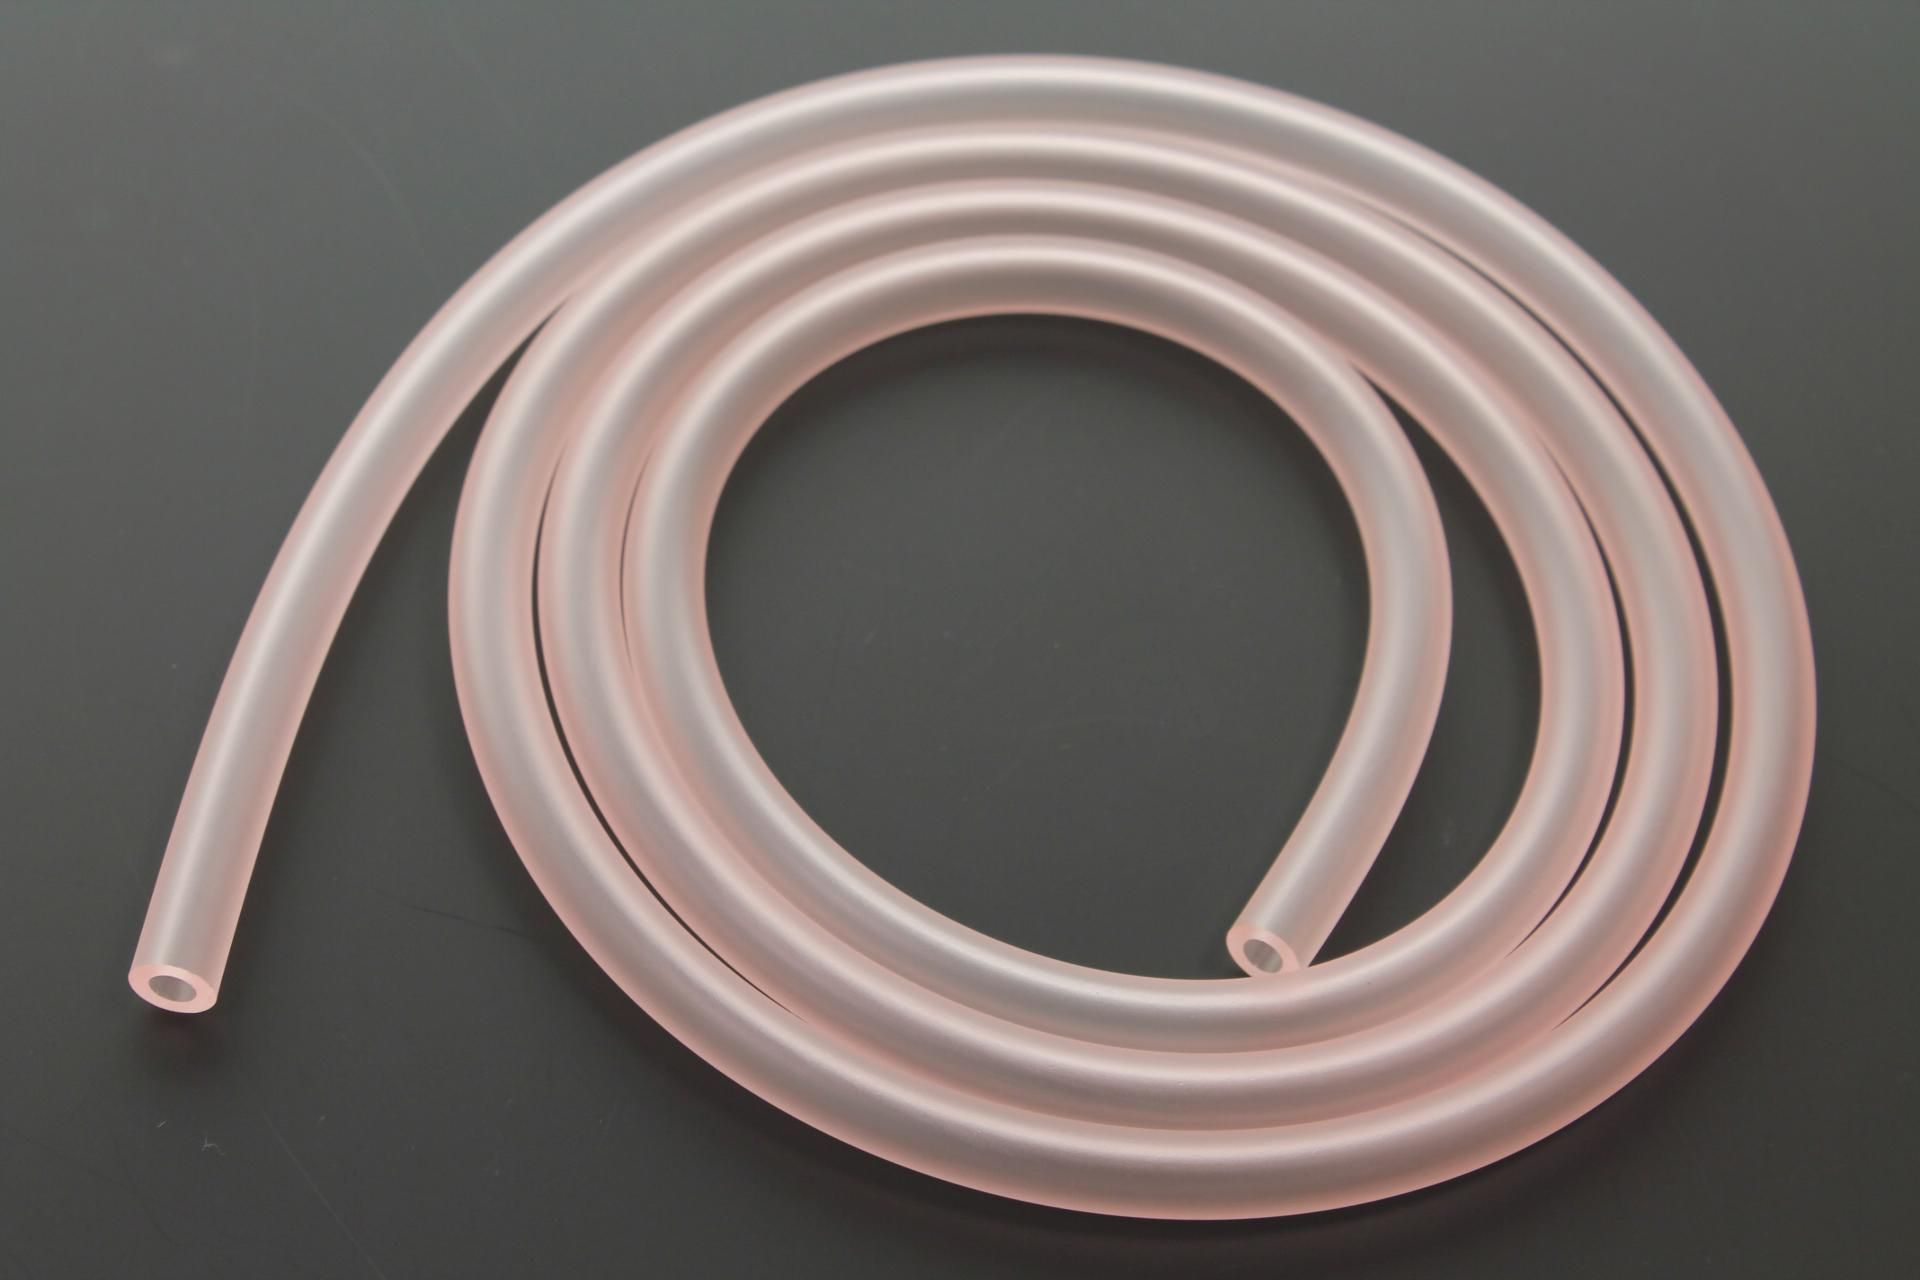 90446-09319-00 Superseded by 91A20-05145-00 - TUBE, FLEXIBLE